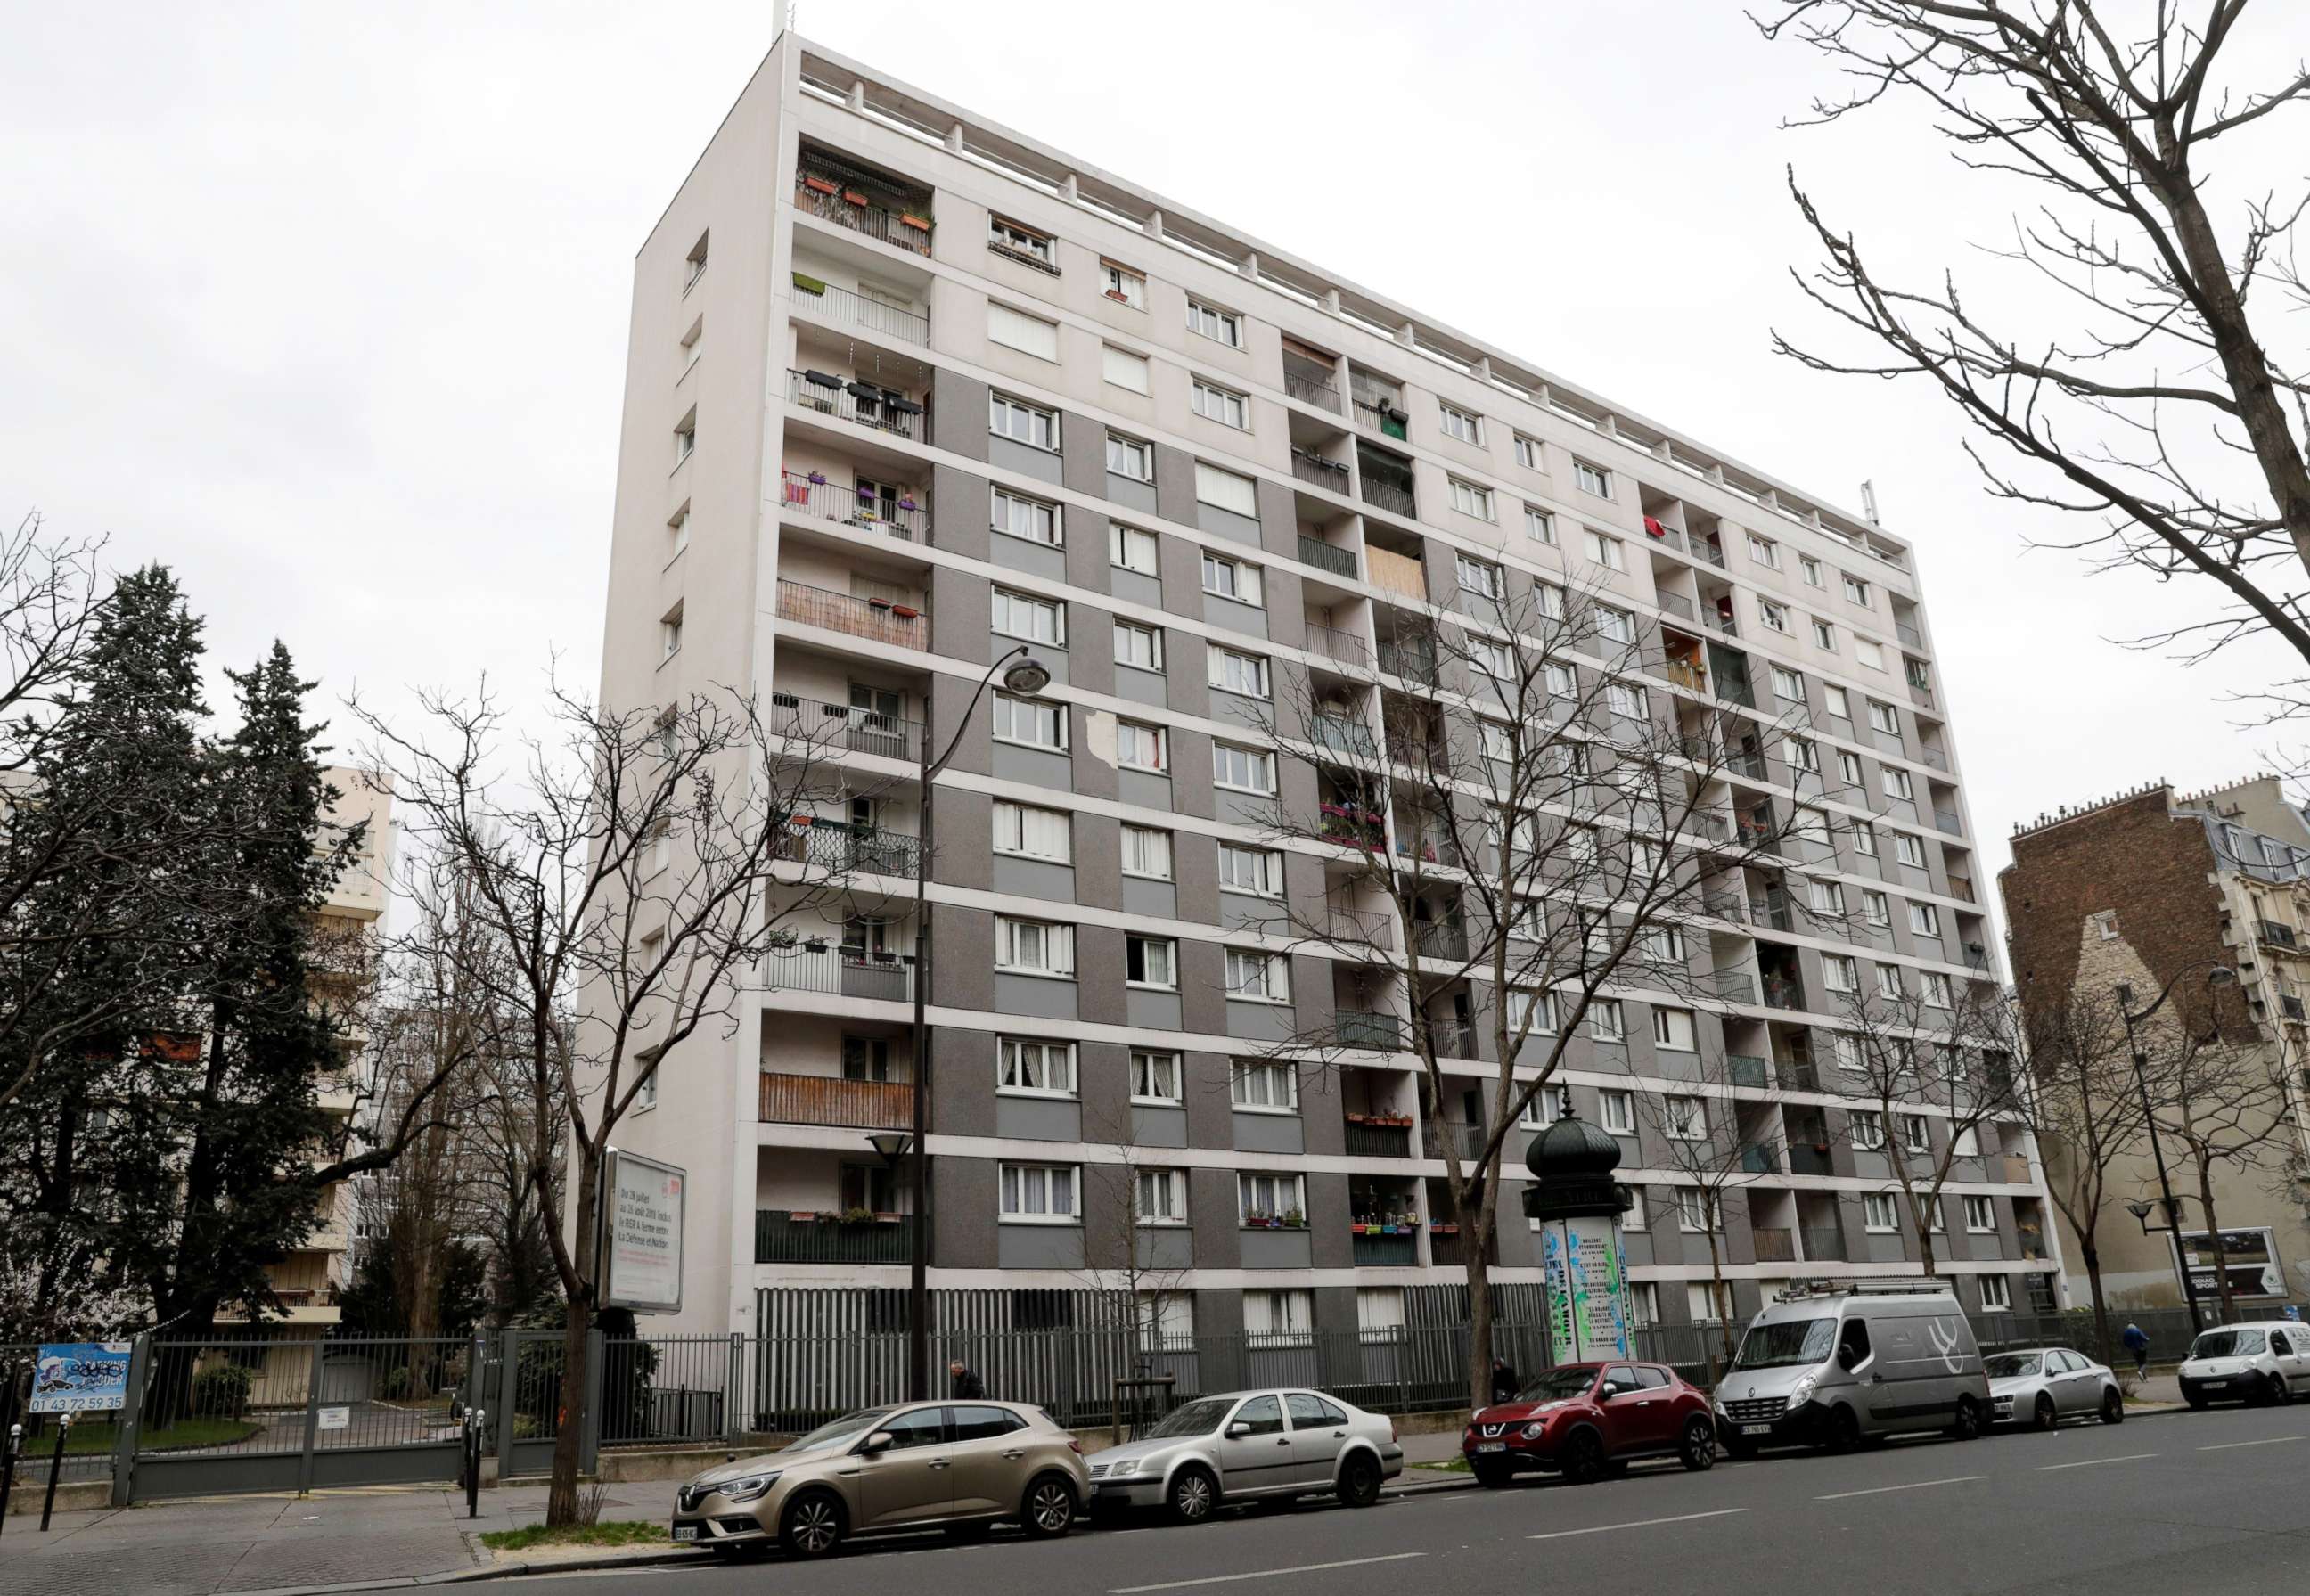 PHOTO: The apartment block in the 11th arrondisement of Paris is seen on March 26, 2018, where the alleged murder of a 85-year-old Mirellie Knoll, a Holocaust survivor, took place.